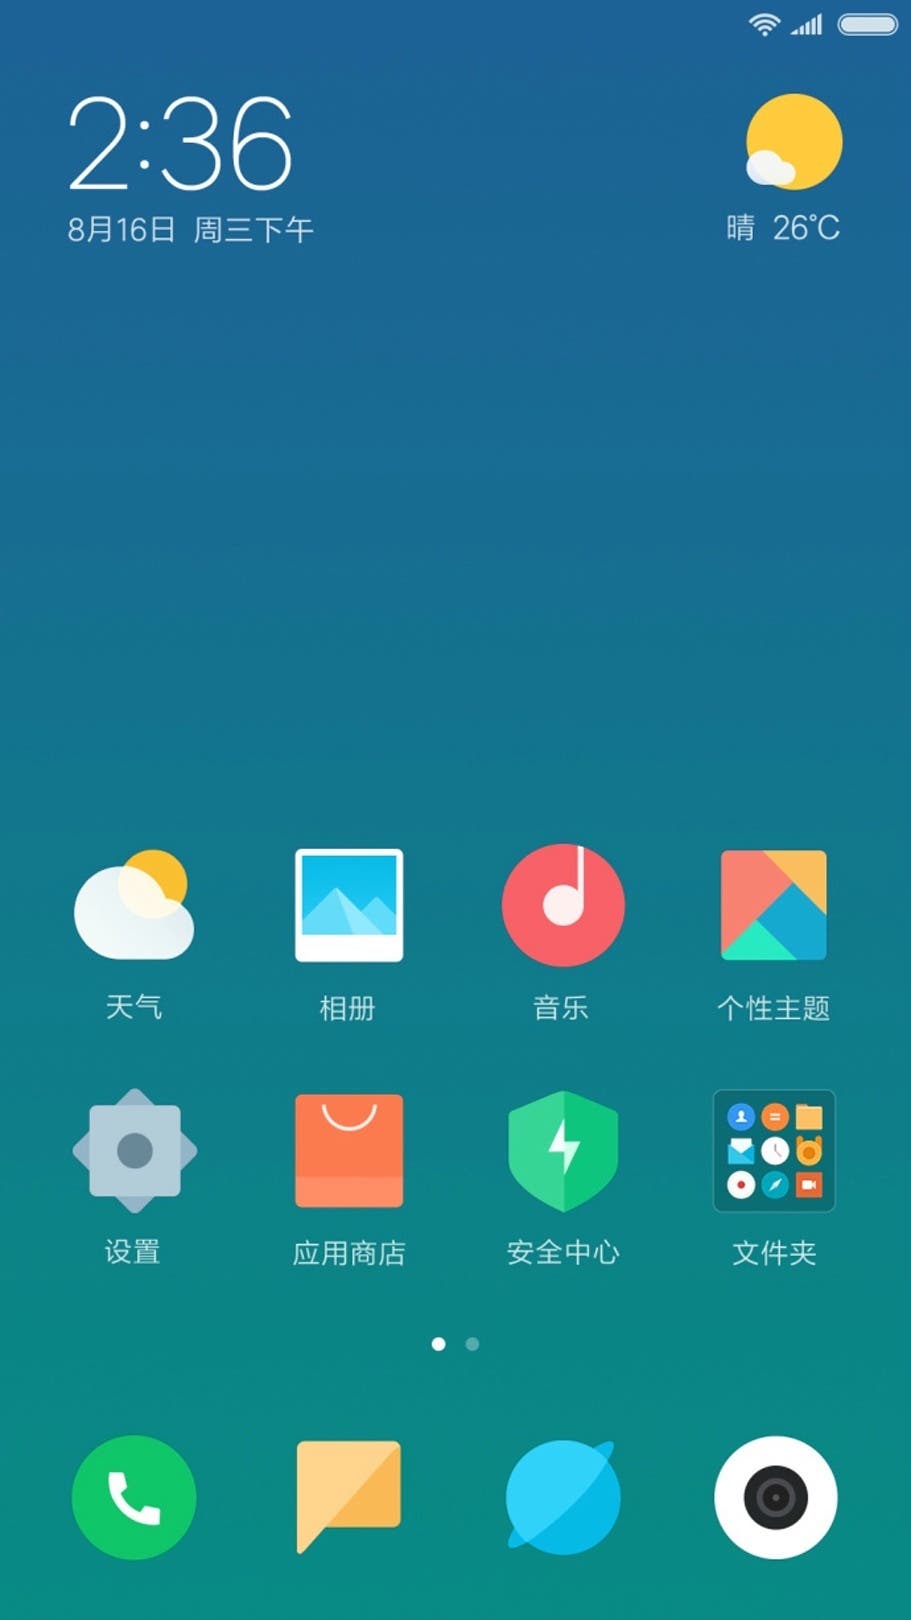 tags show tumblr themes screenshots dock reveal Official 9 redesigned MIUI leak,